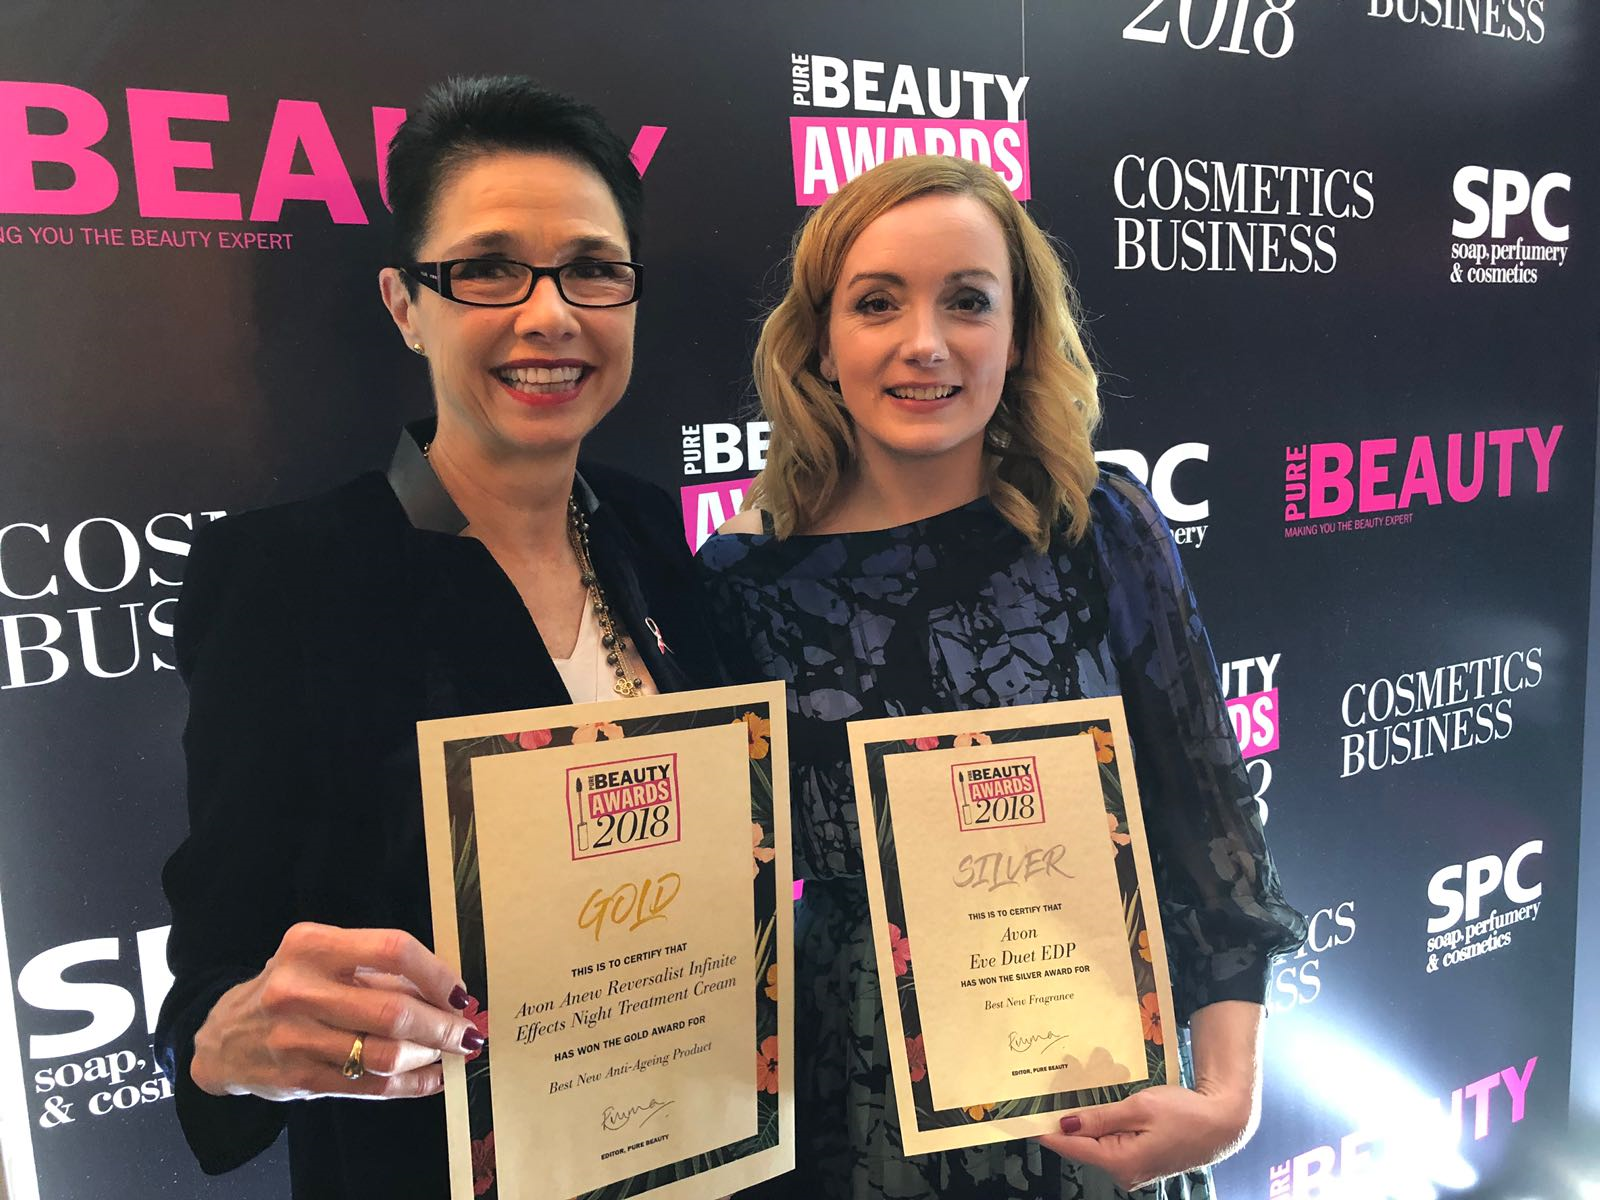 Two category wins at Pure Beauty Awards